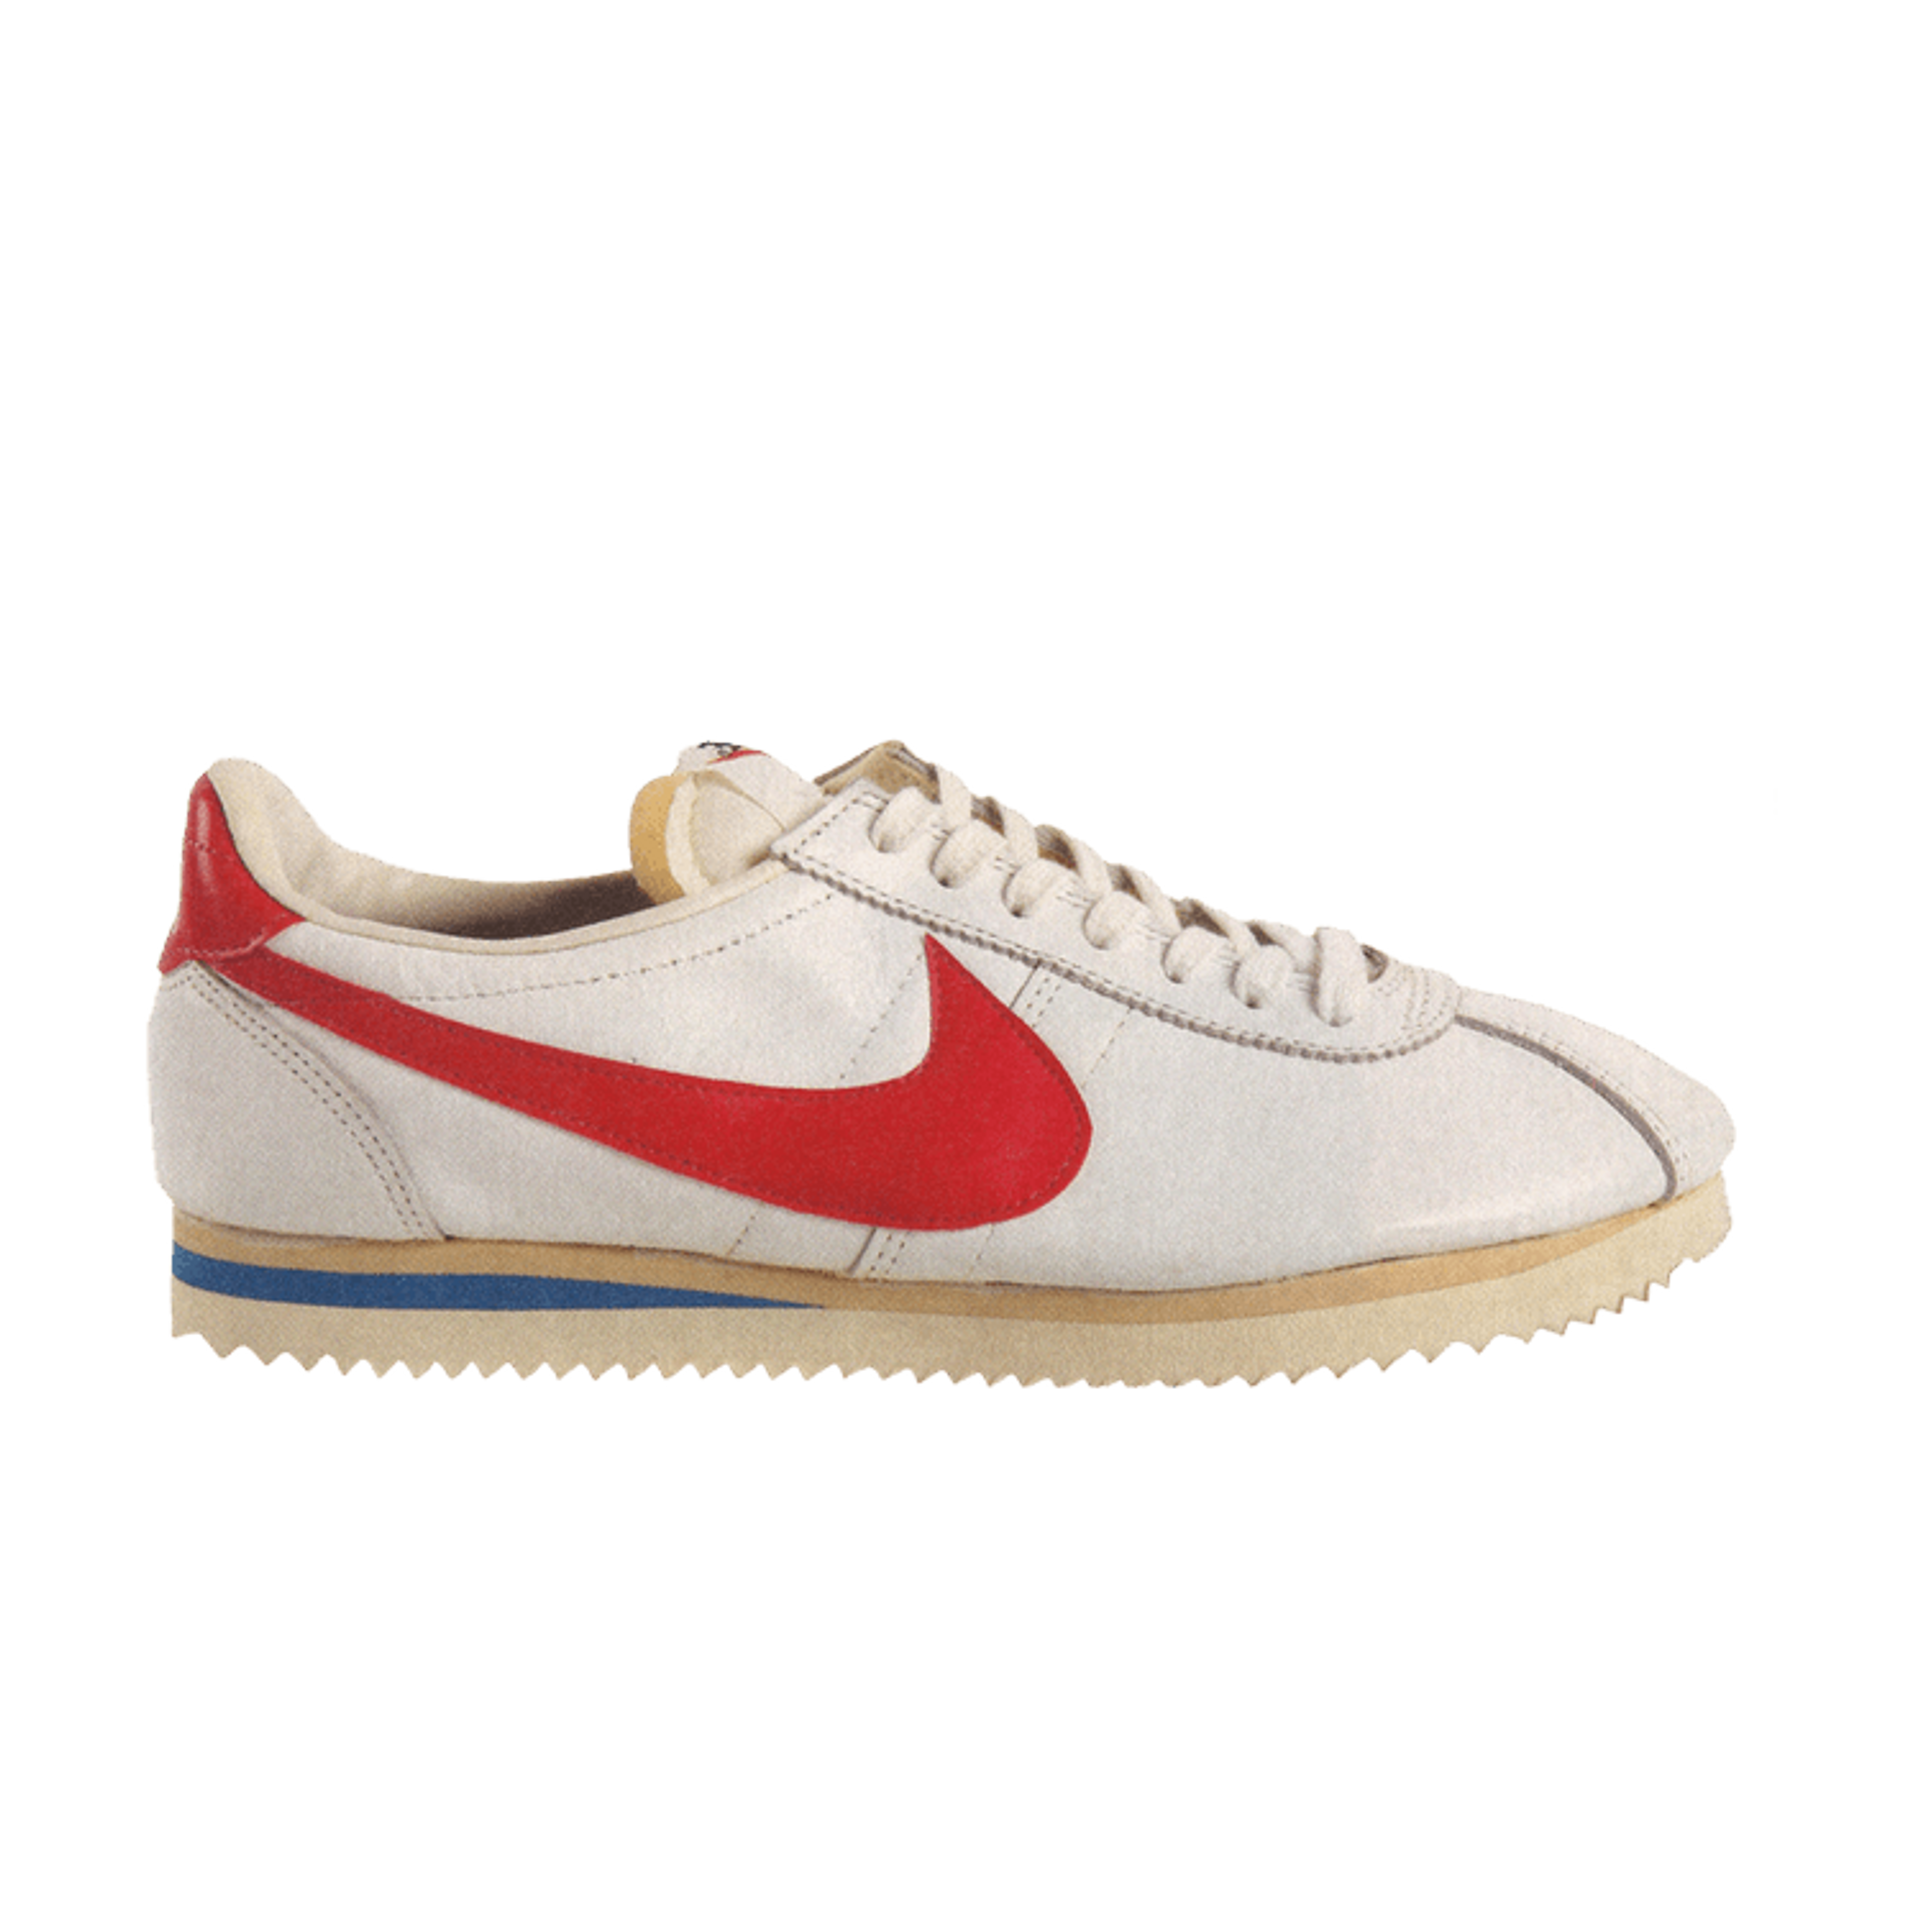 Cortez Leather Deluxe 'White Red' 1977